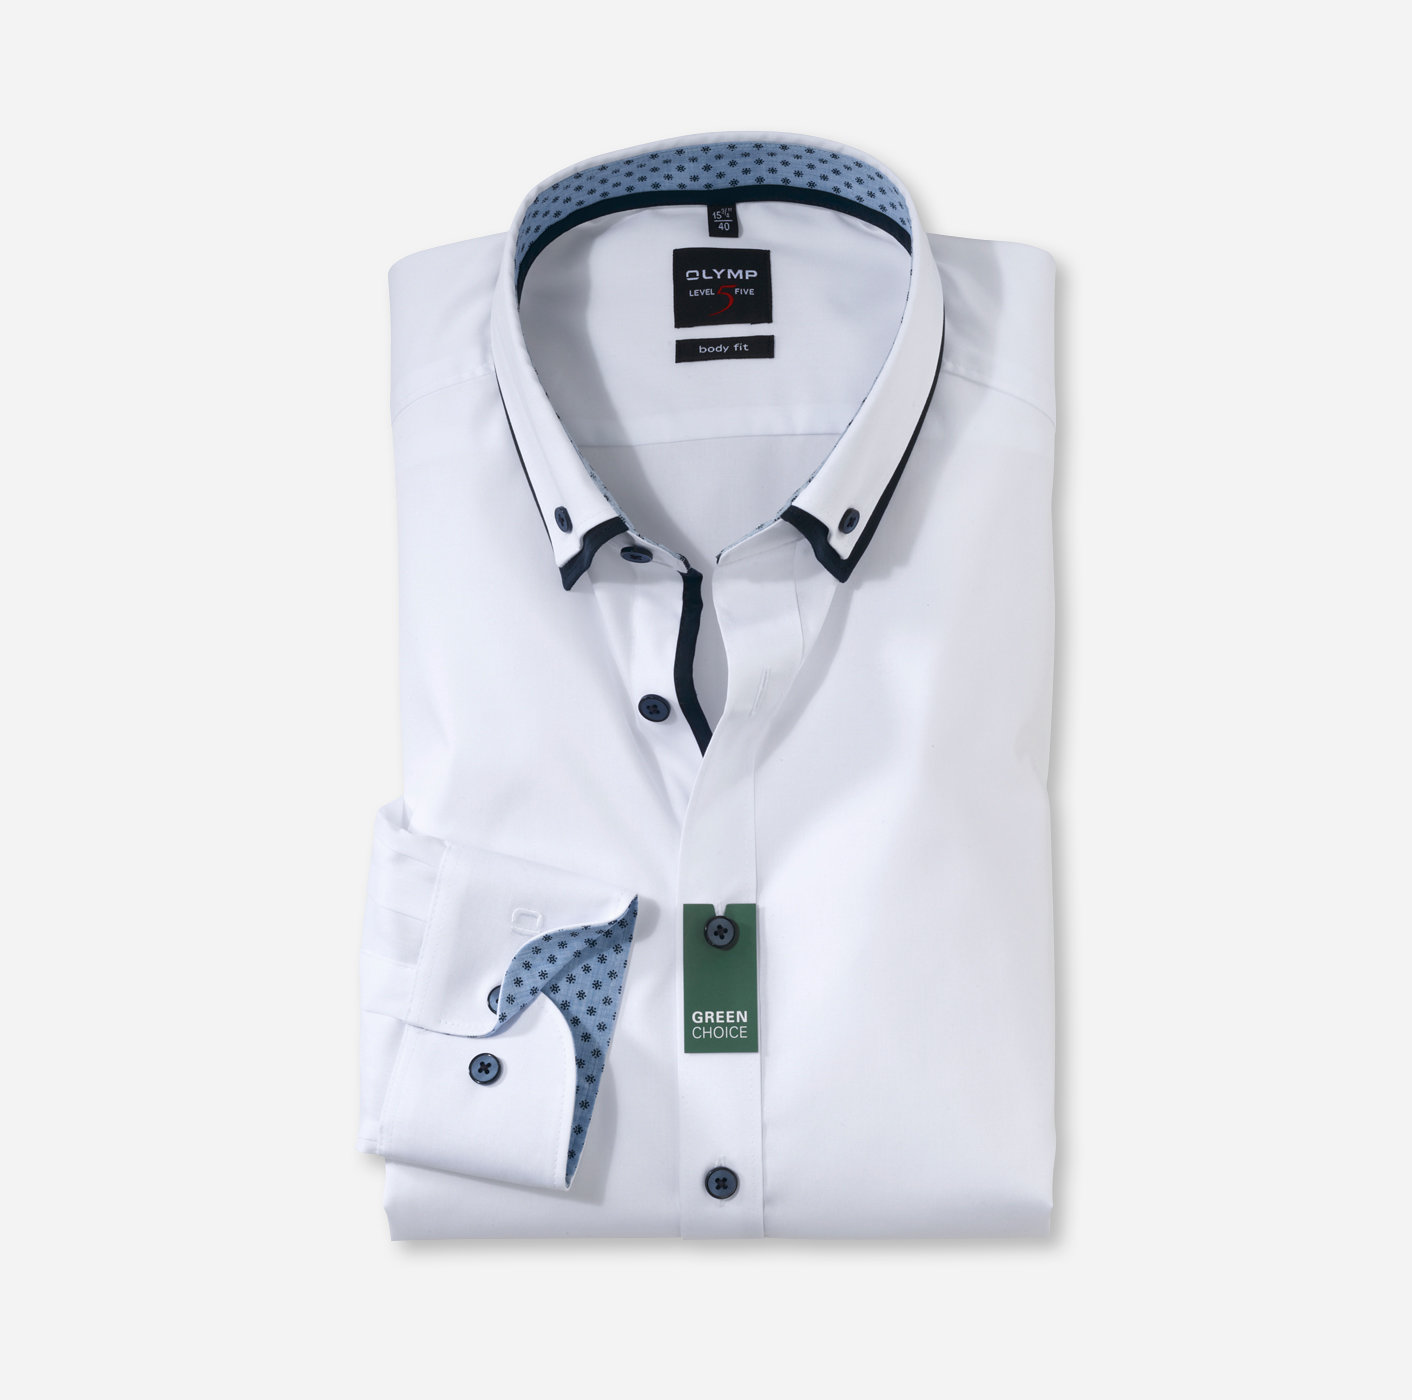 Businesshemd | OLYMP Level Five, body fit, Button-down | Weiß - 21528400